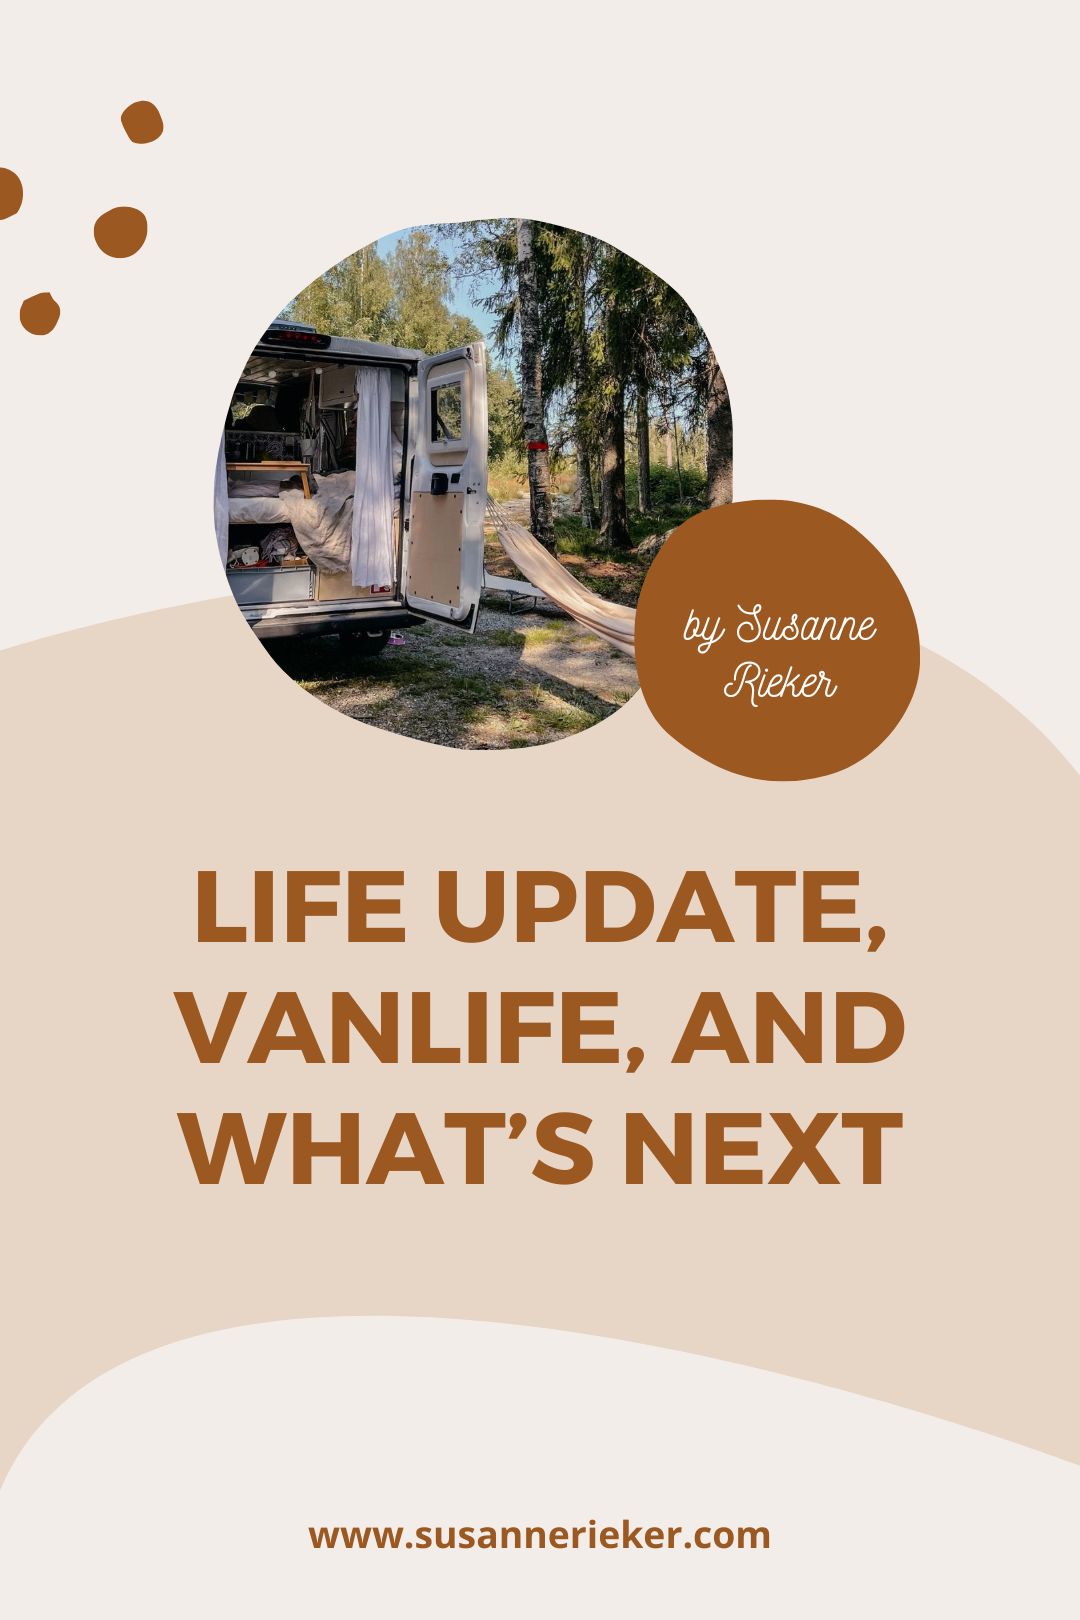 Life Update, Vanlife, and What's Next